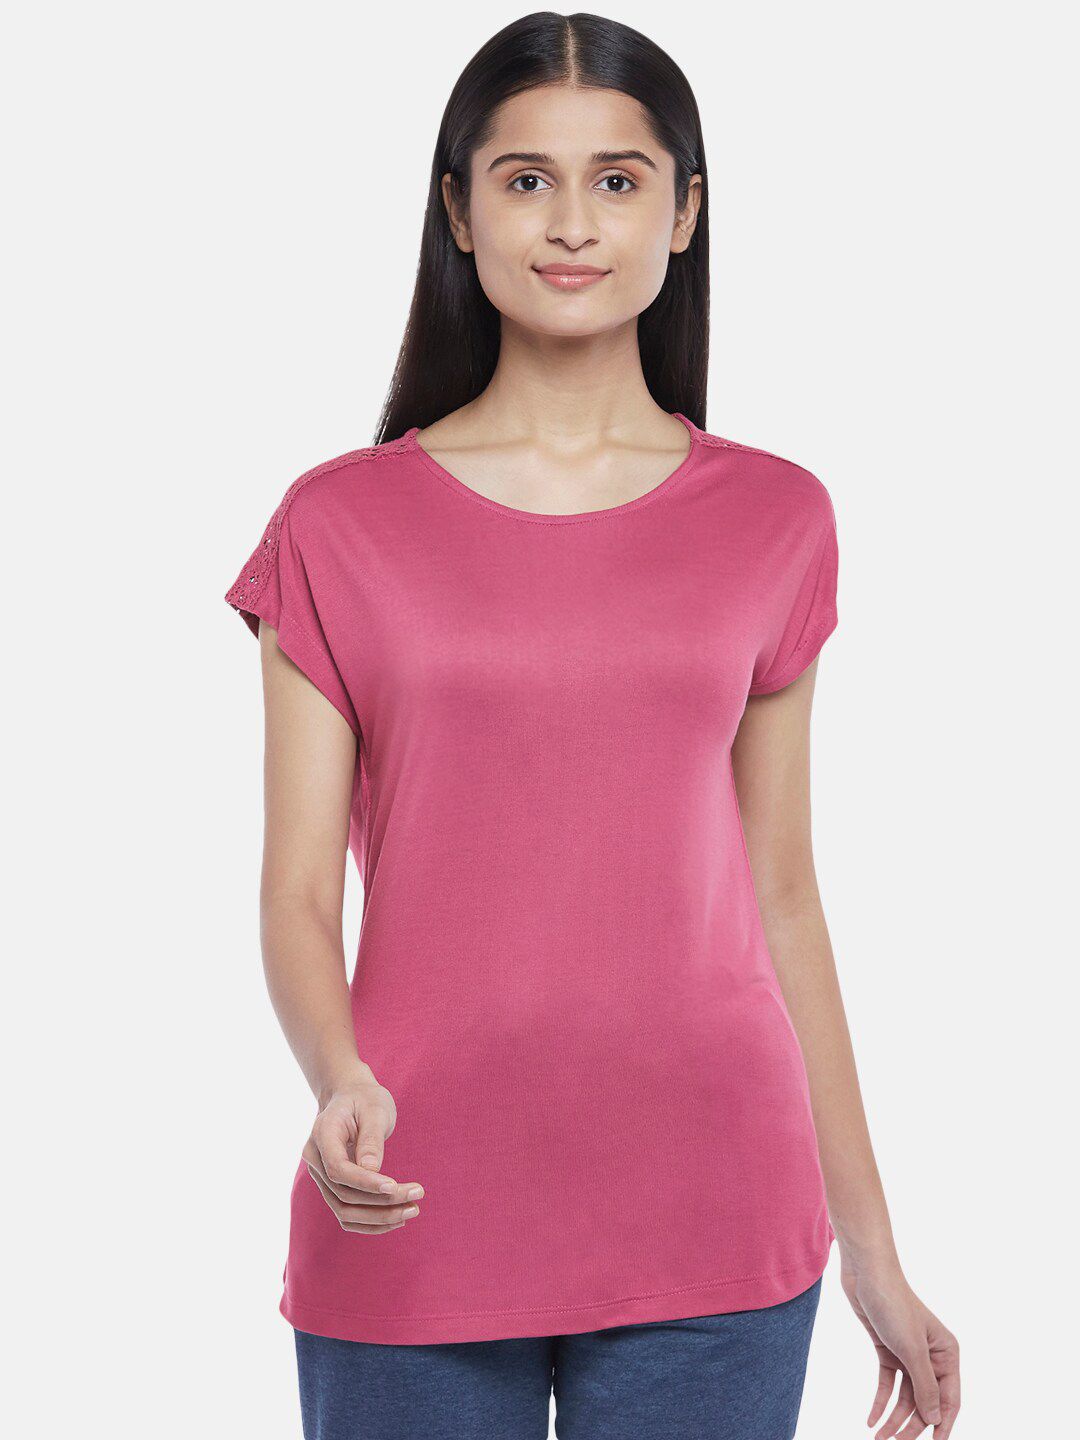 Dreamz by Pantaloons Pink Solid Pure Cotton Lounge T-shirt Price in India